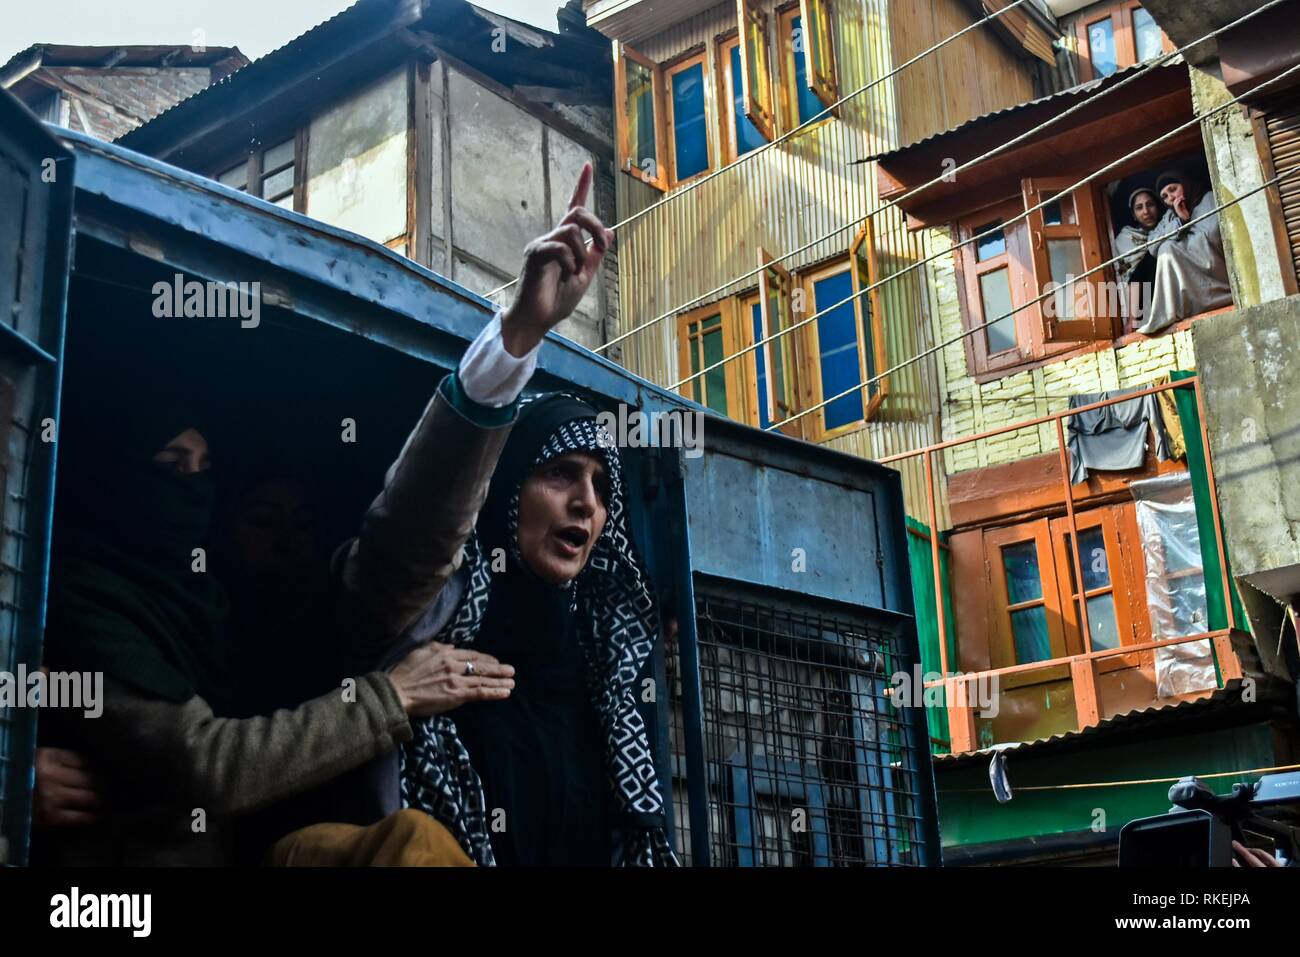 February 11, 2019 - Srinagar, J&K, India - Kashmiri women watch from the window as a member of the Muslim Khawateen Markaz shouts pro-freedom slogans from a police vehicle after being detained during a protest in Srinagar, Indian administered Kashmir. Curfew-like restrictions have been imposed in parts of Srinagar city in the wake of a call for strike by separatist groups to commemorate the death anniversary of Maqbool Bhat, the Jammu and Kashmir Liberation Front (JKLF) founder who was hanged on Feb 11, 1984 in Delhi's Tihar Jail. The separatist leaders and activists staged a protest demandi Stock Photo